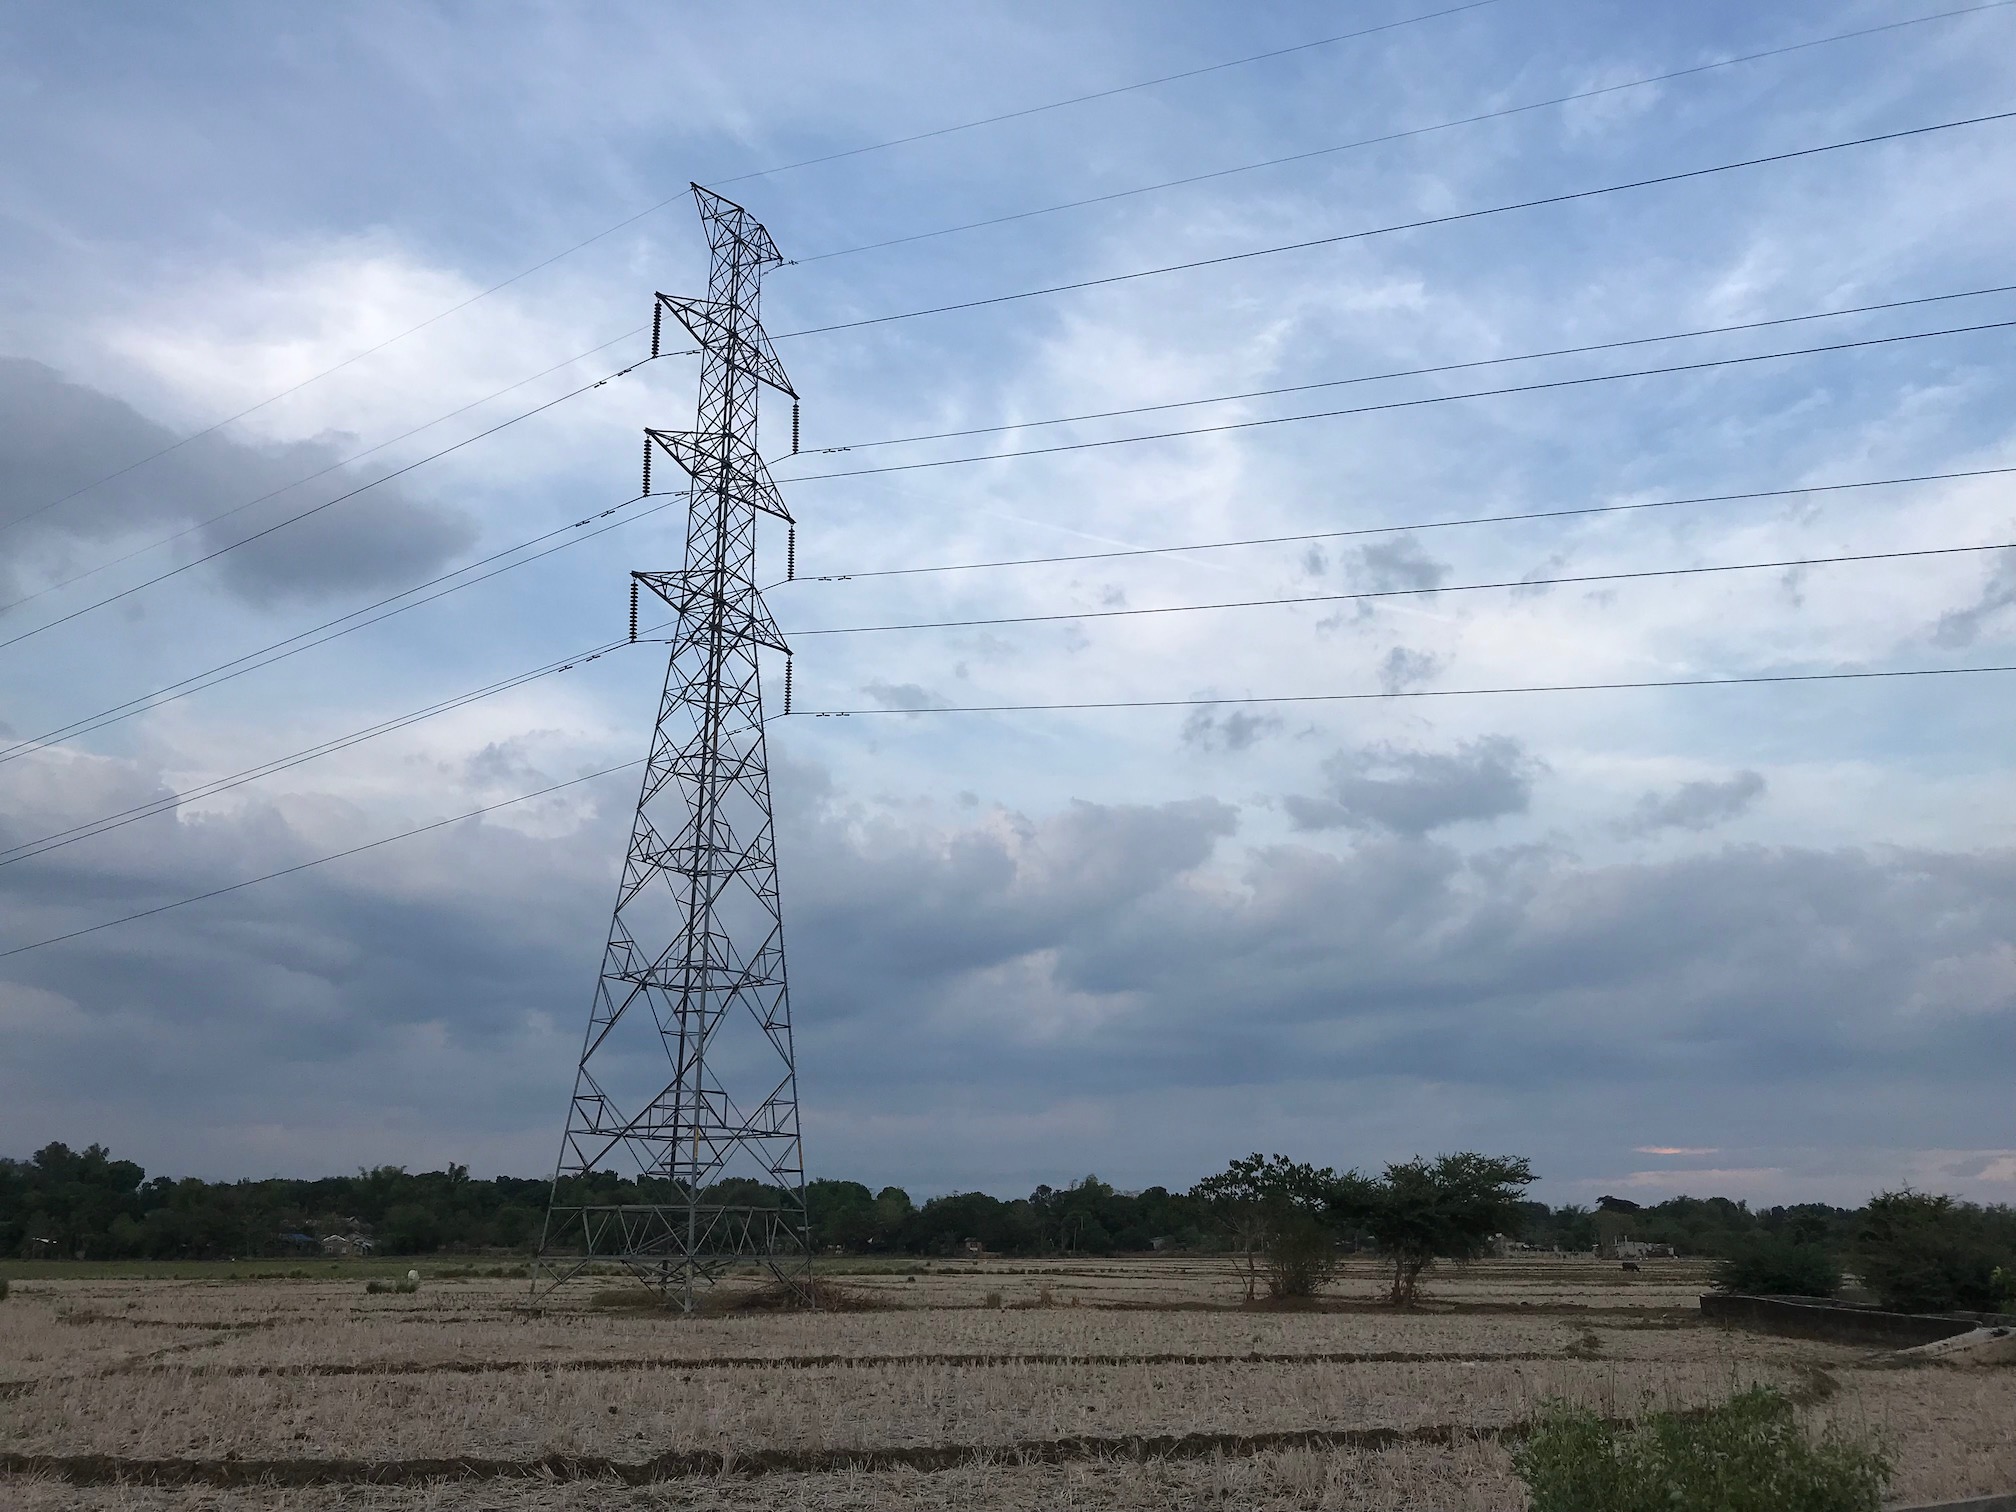 Electric tower, the field, and the sky